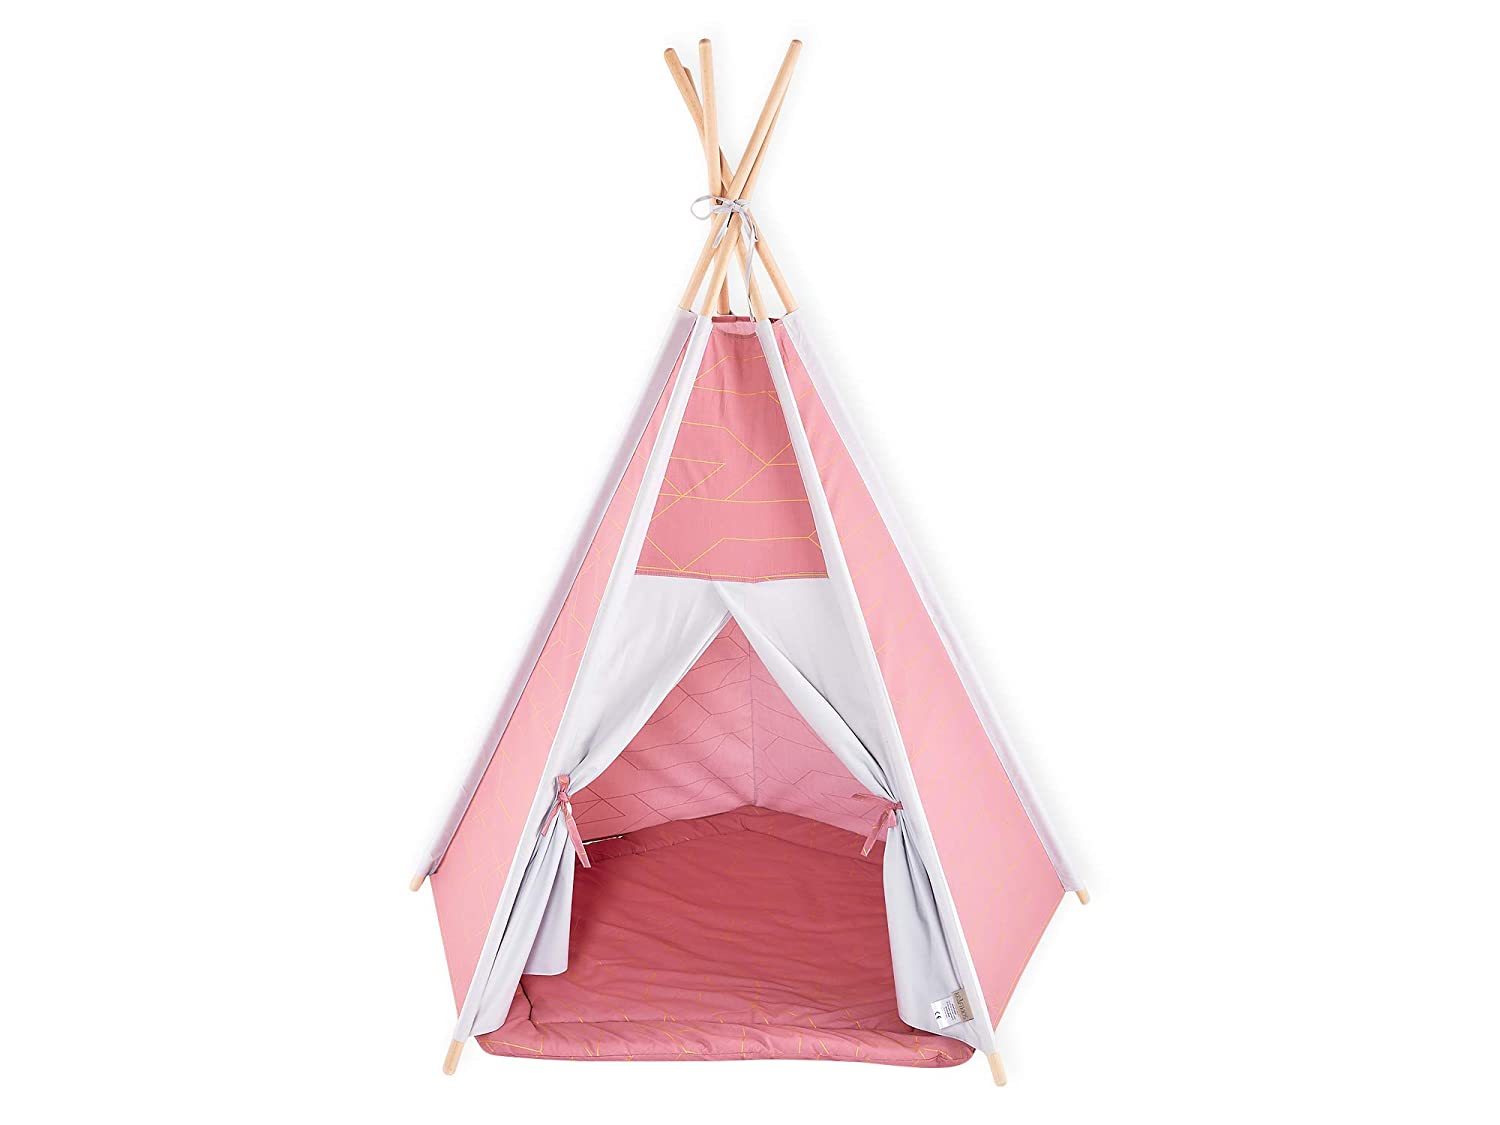 Power kids Tent teepee White Marble Native American Tent for Playing Teepi 